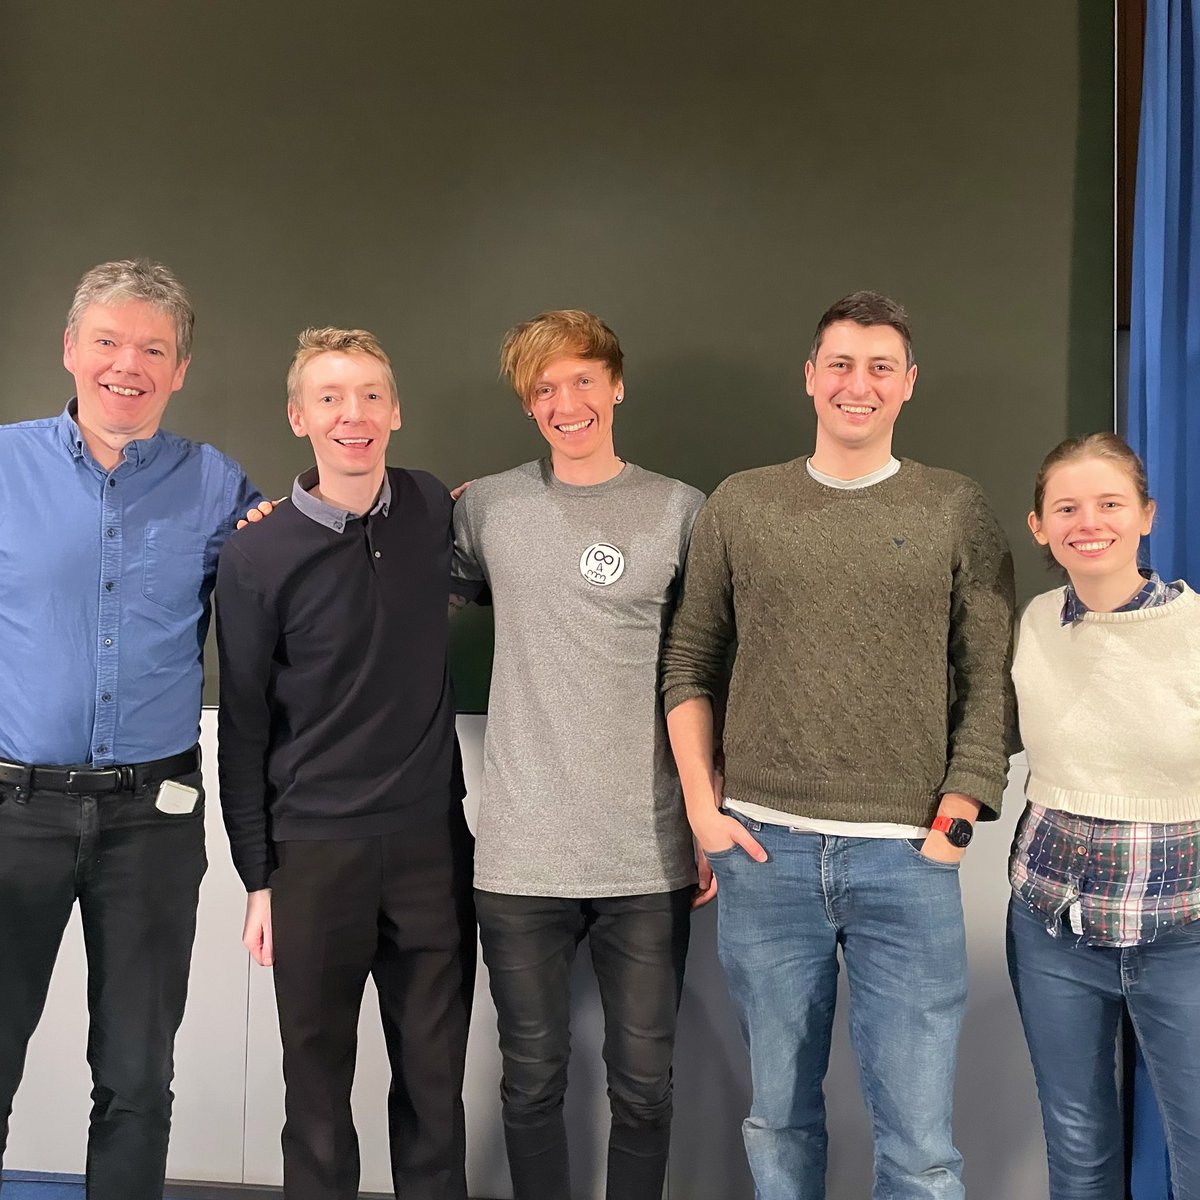 HELLO MATHS FANS!! Dream team lineup recording lectures today @OxfordConted to be released online in the ‘Maths Fan Lecture Series’. You can look forward to talks from @simonoxfphys, @numberphile‘s @jamesgrime and @sophiemacmaths, and @robeastaway. Online tickets available soon!